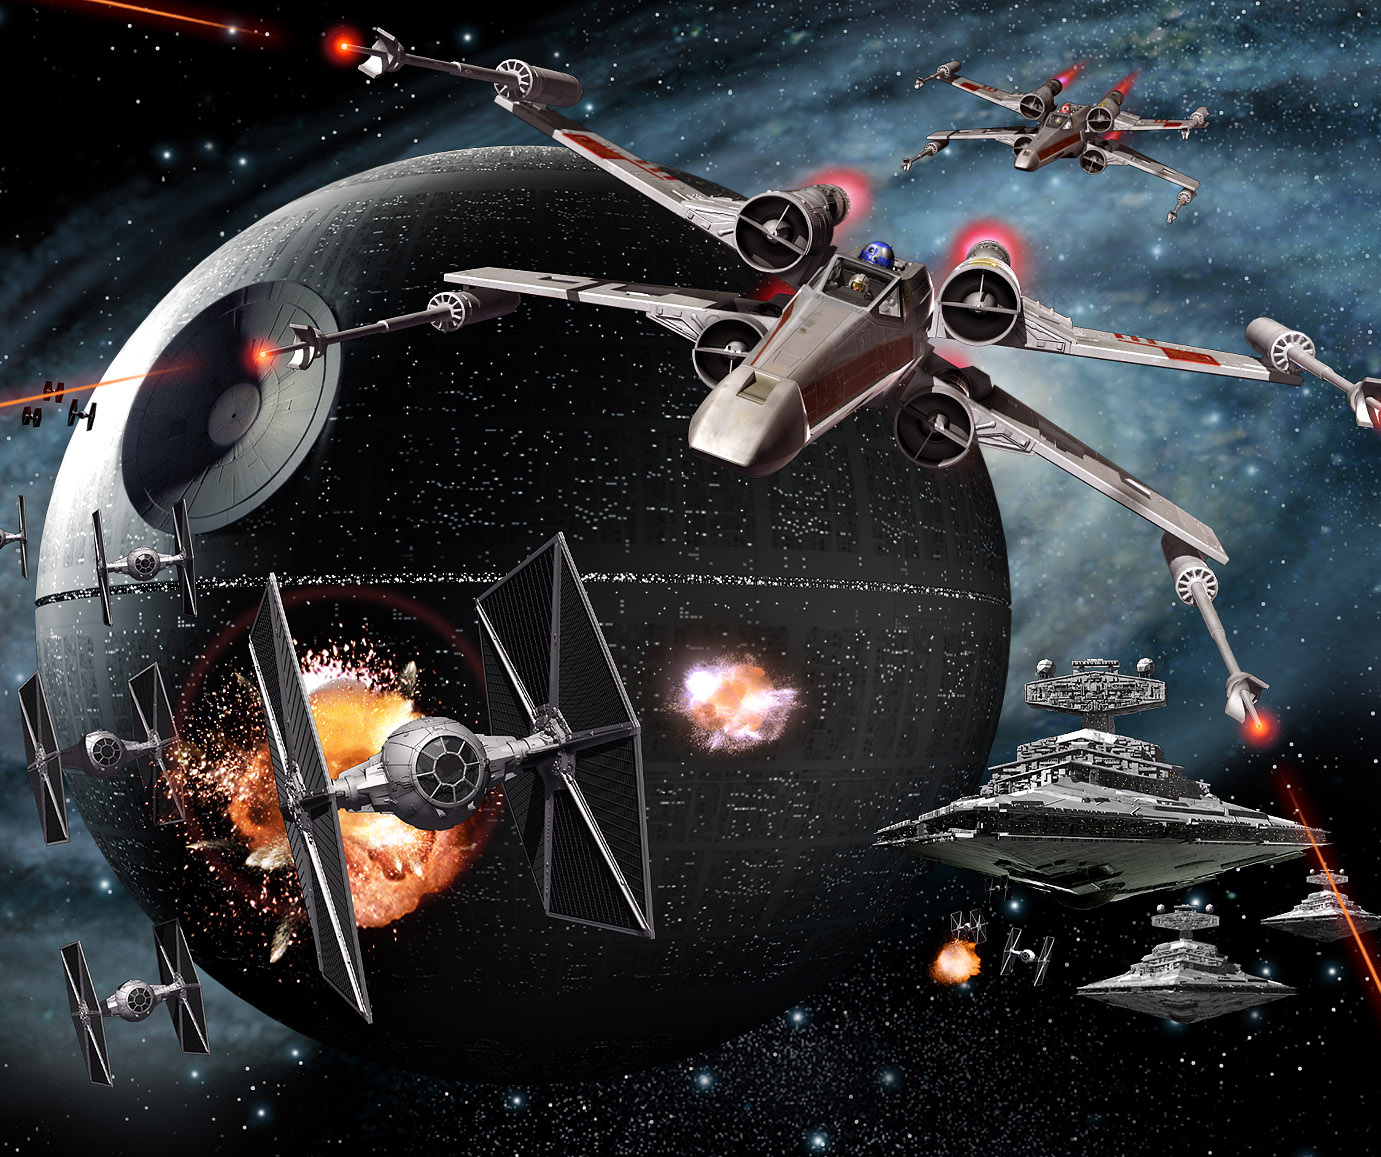 Star Wars Rebel X-Wing fighters battle Imperial spacecraft in front of the Death Star (Credit: Nightwing3 / Zedge.net)